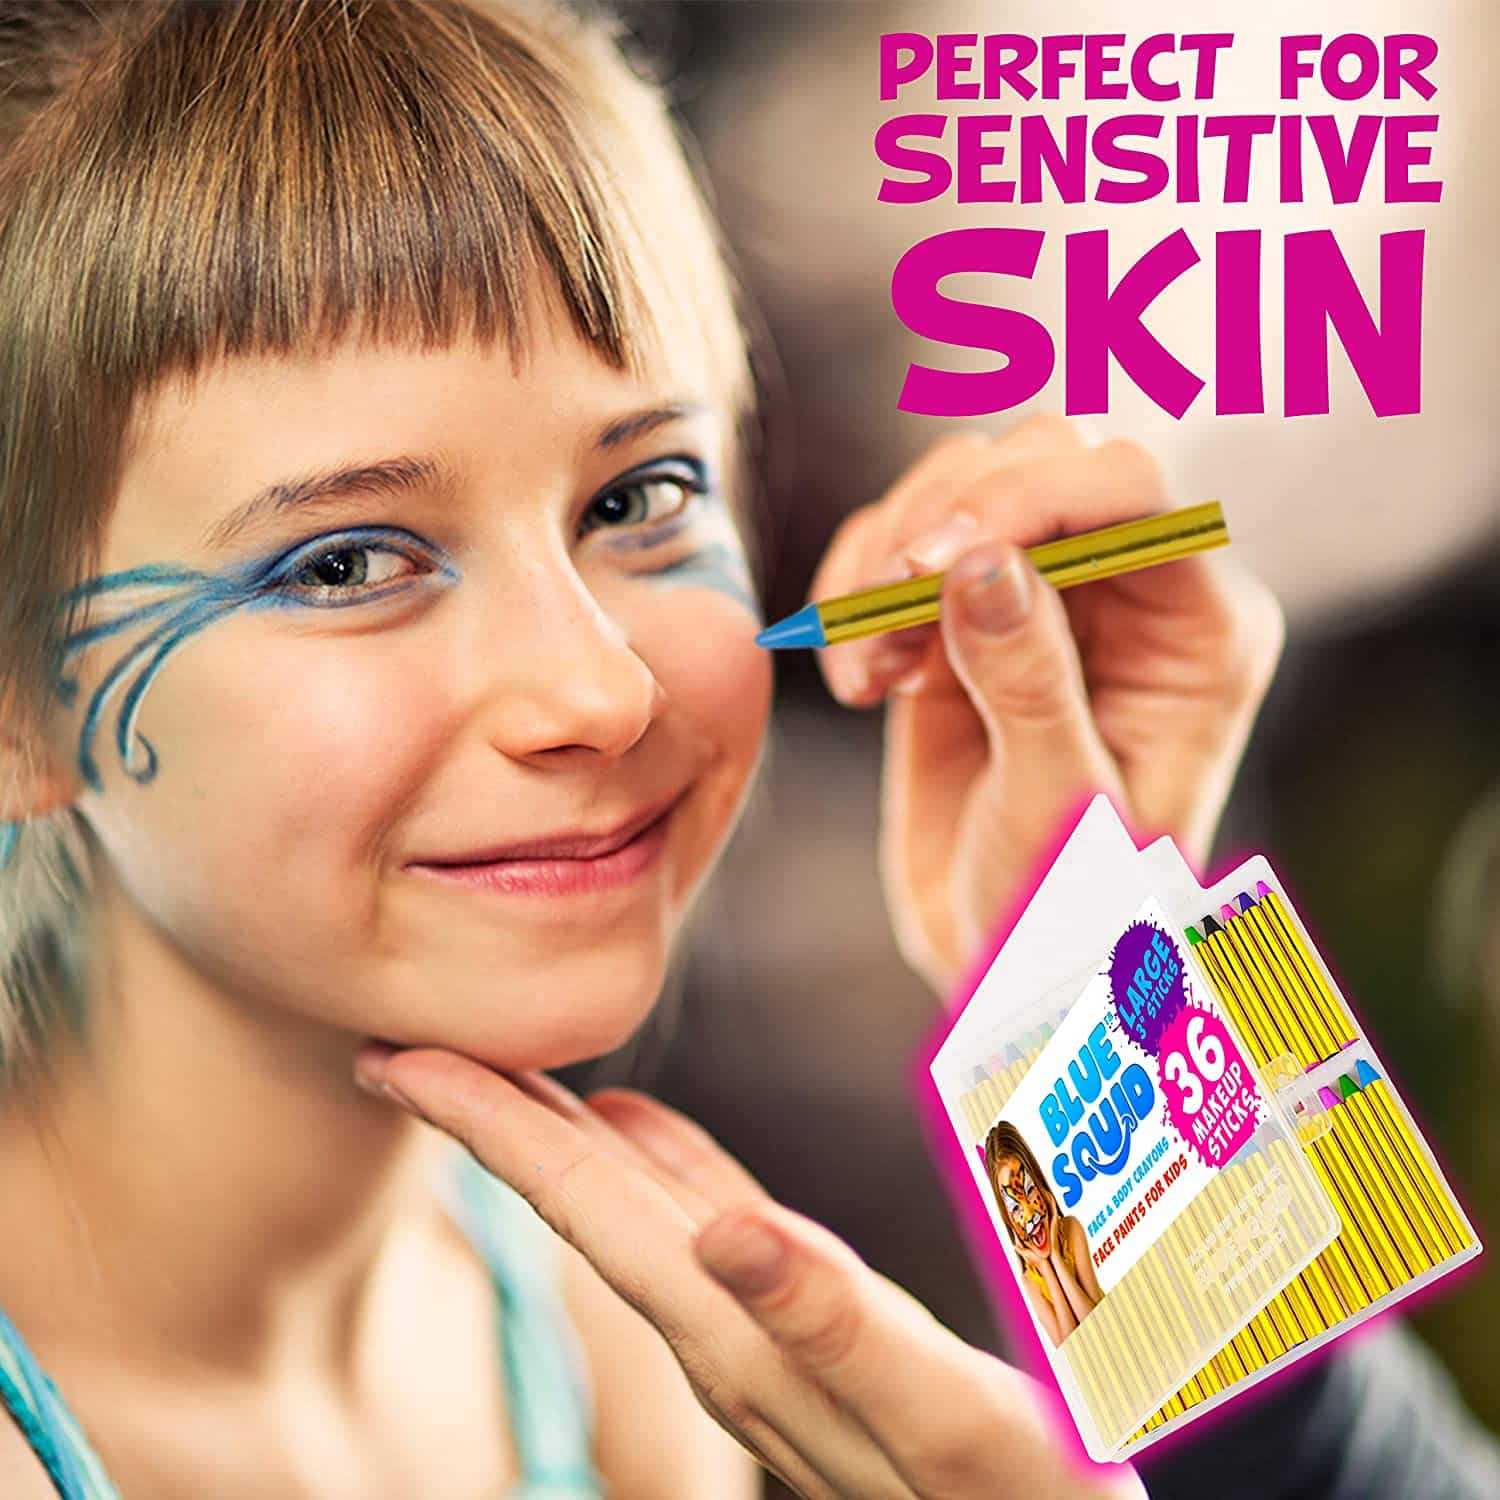 LIGHTNING DEAL ALERT! Face Paint Crayons for Kids is 55% off